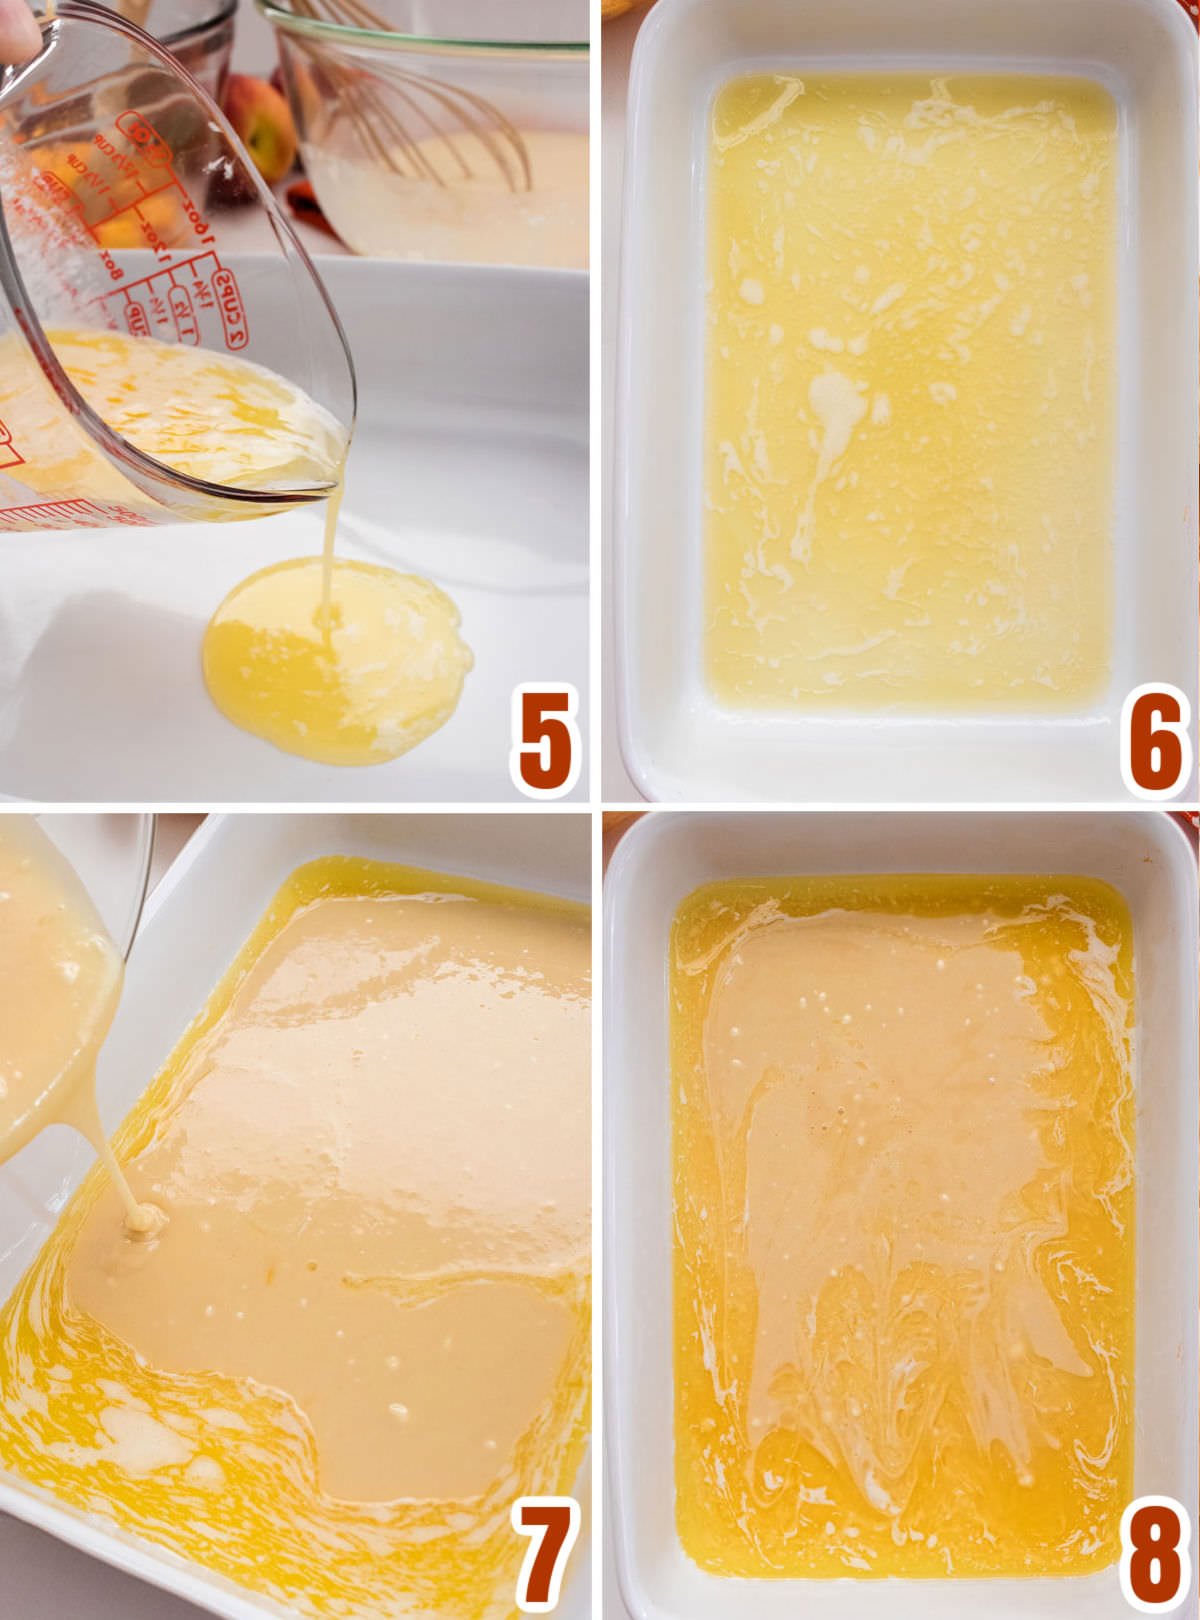 Collage image showing the steps for pouring the melted butter and the cobbler batter into the backing pan.